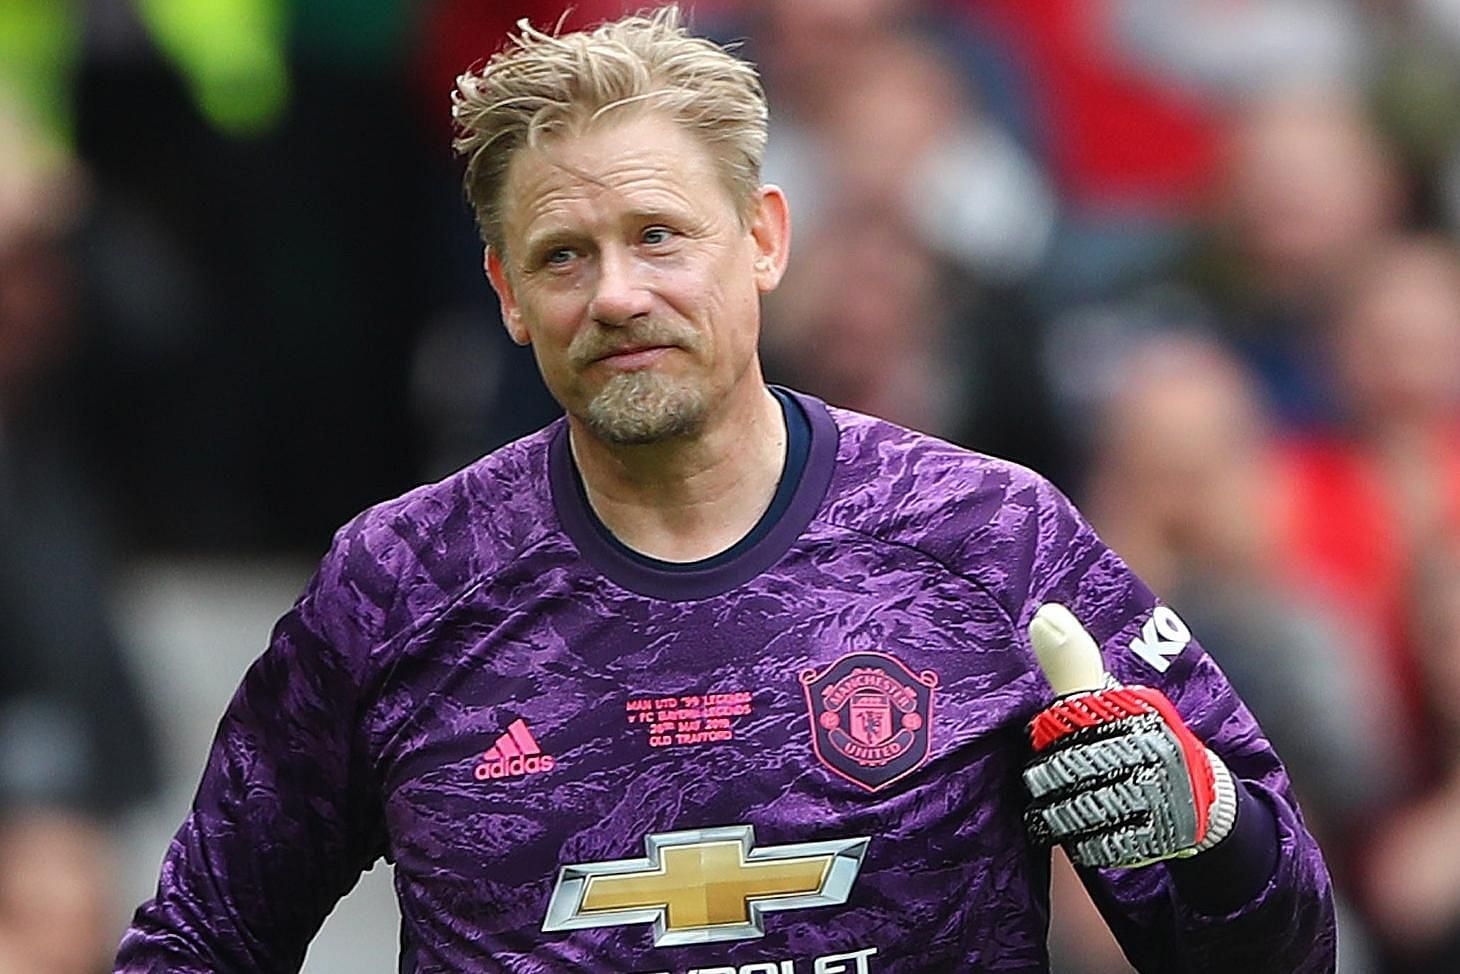 Schmeichel spent seven years with Manchester United.